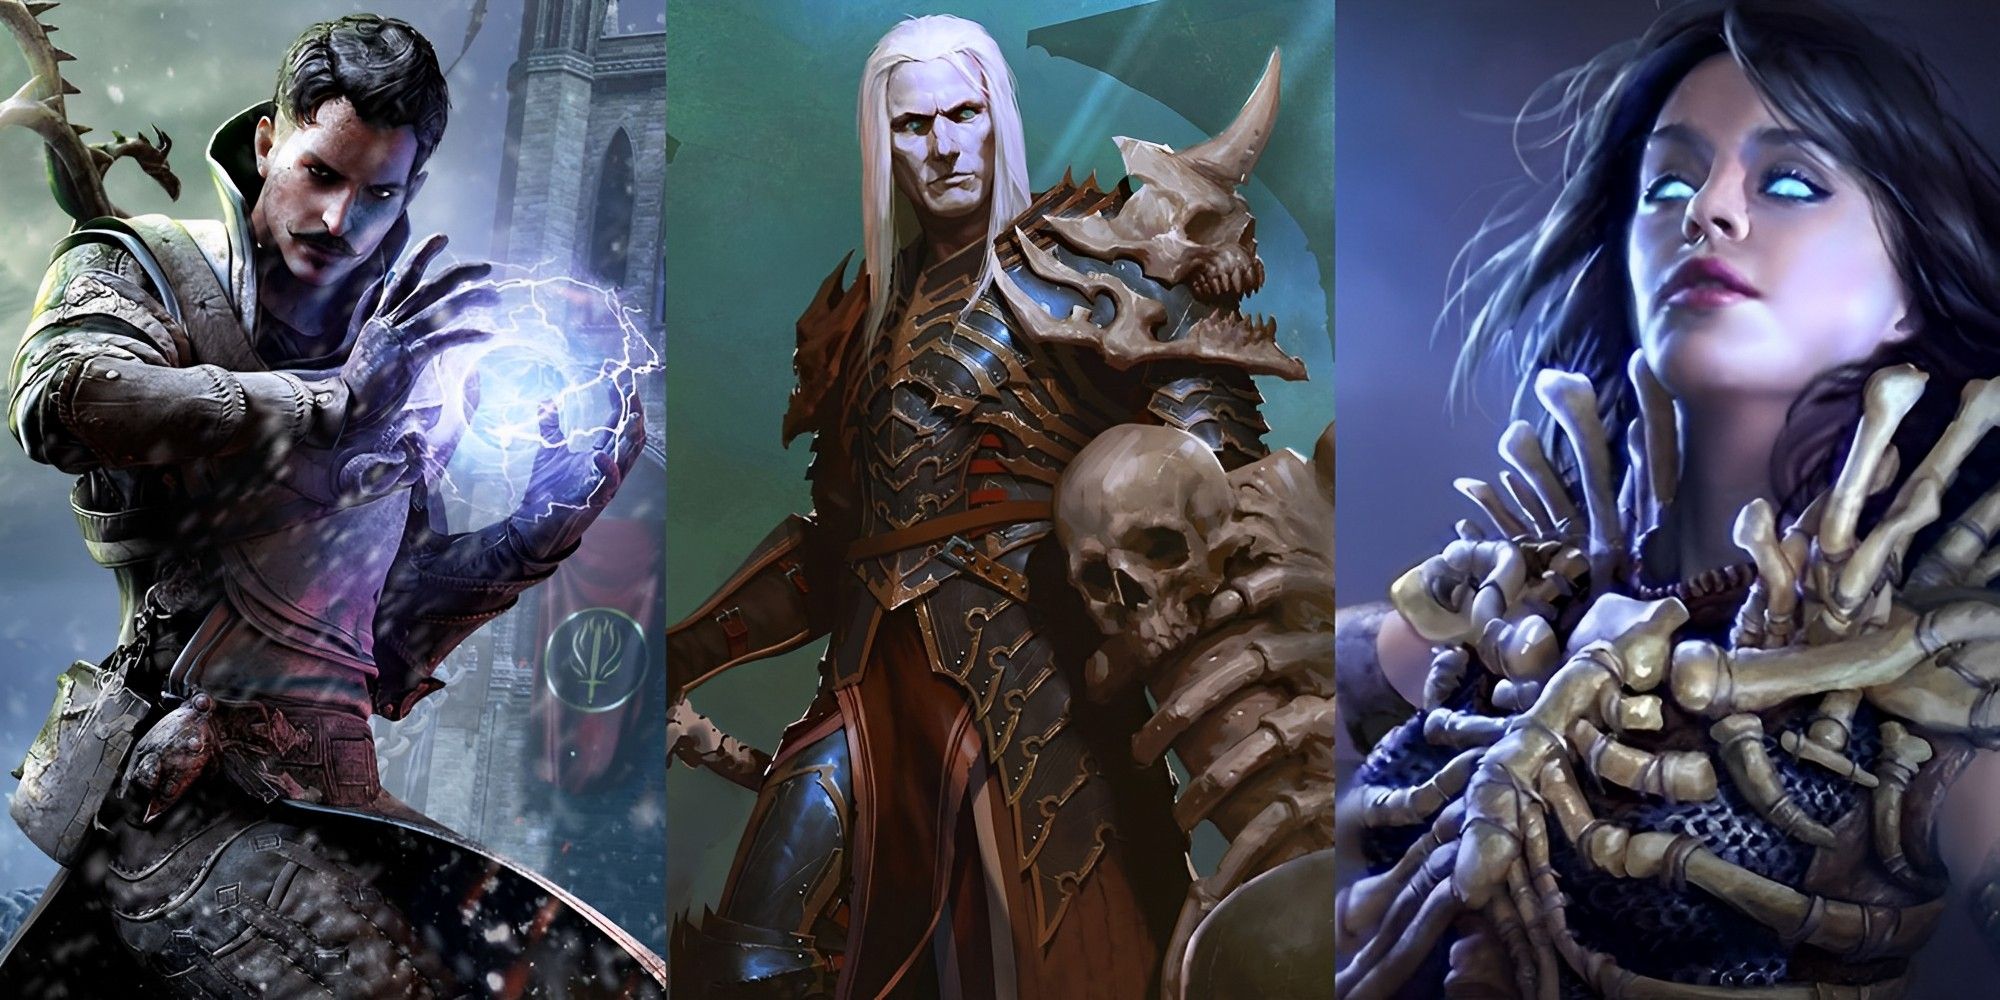 Necromancers from Dragon Age: Inquisition, Diablo 3, and Path of Exile standing beside each other